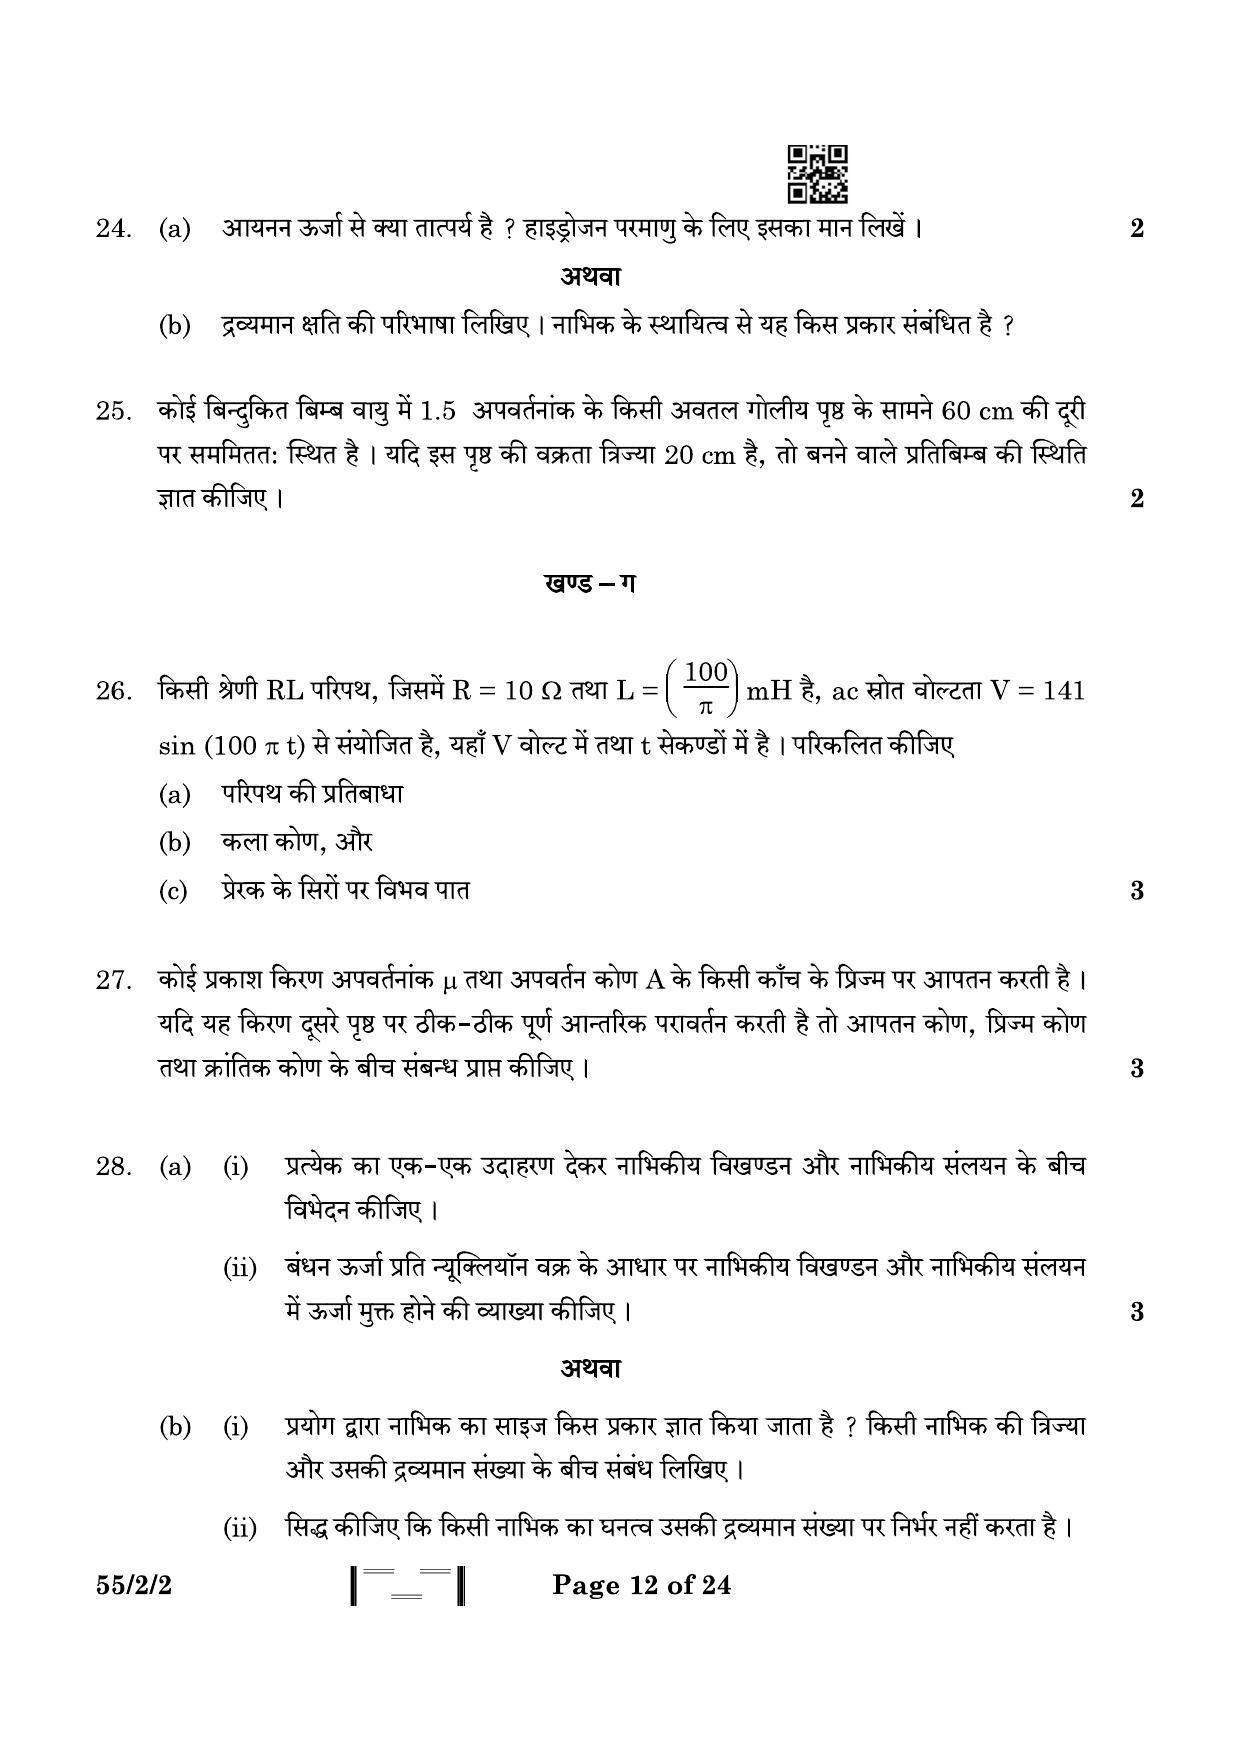 CBSE Class 12 55-2-2 Physics 2023 Question Paper - Page 12